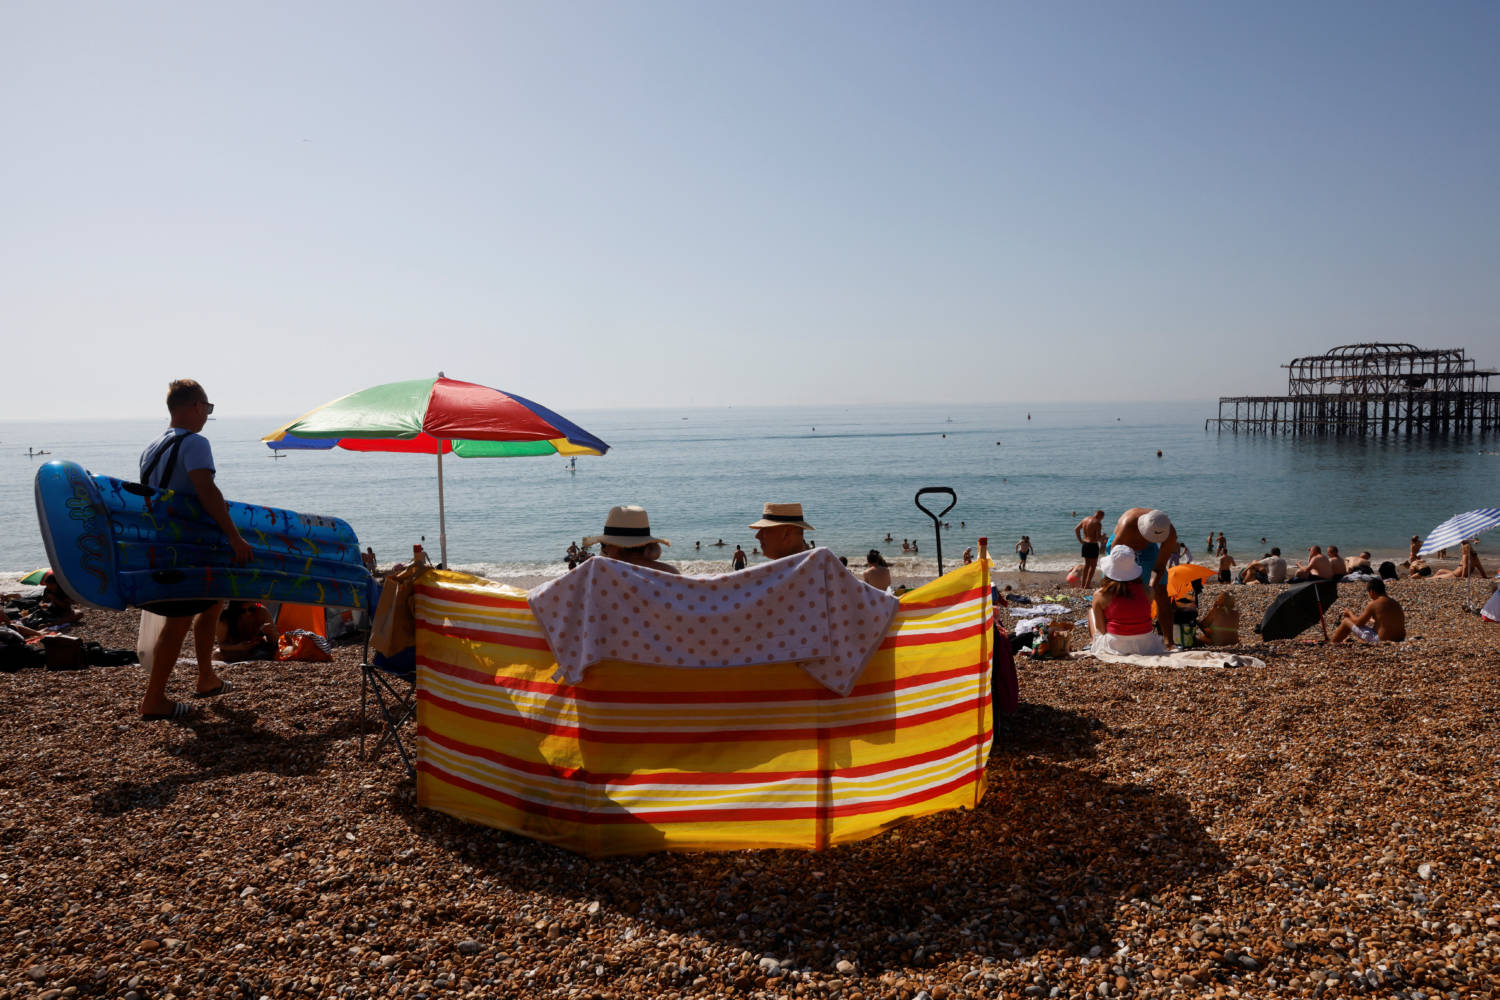 People Enjoy The Beach During Hot Weather In Brighton